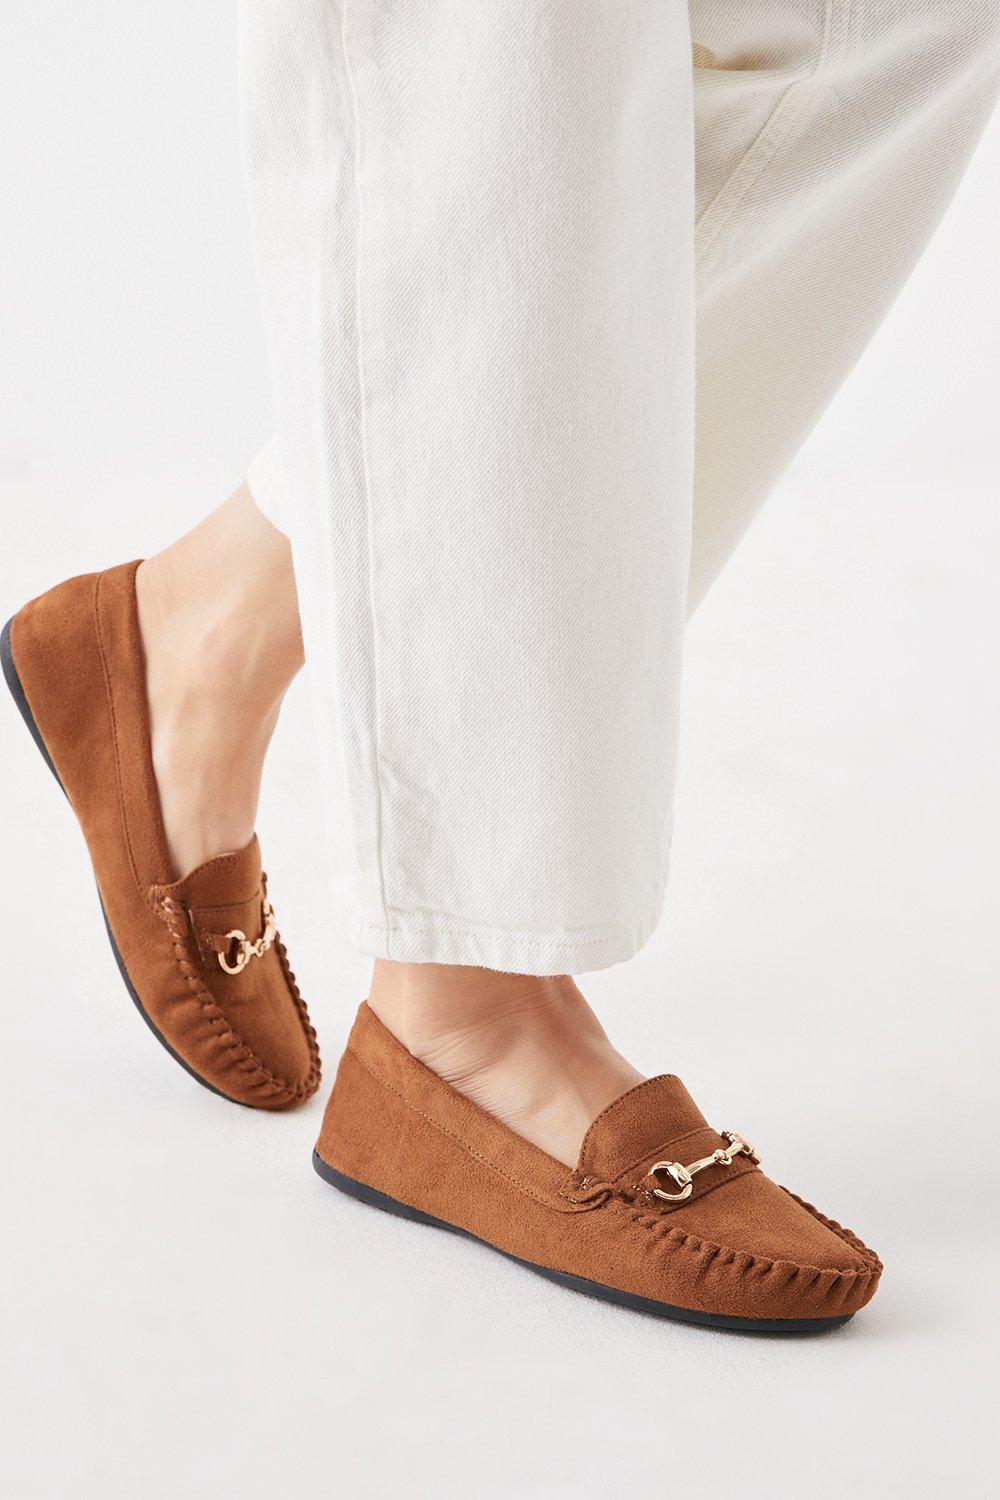 Image of Womens Good For The Sole: Nina Comfort Moccasin Loafers